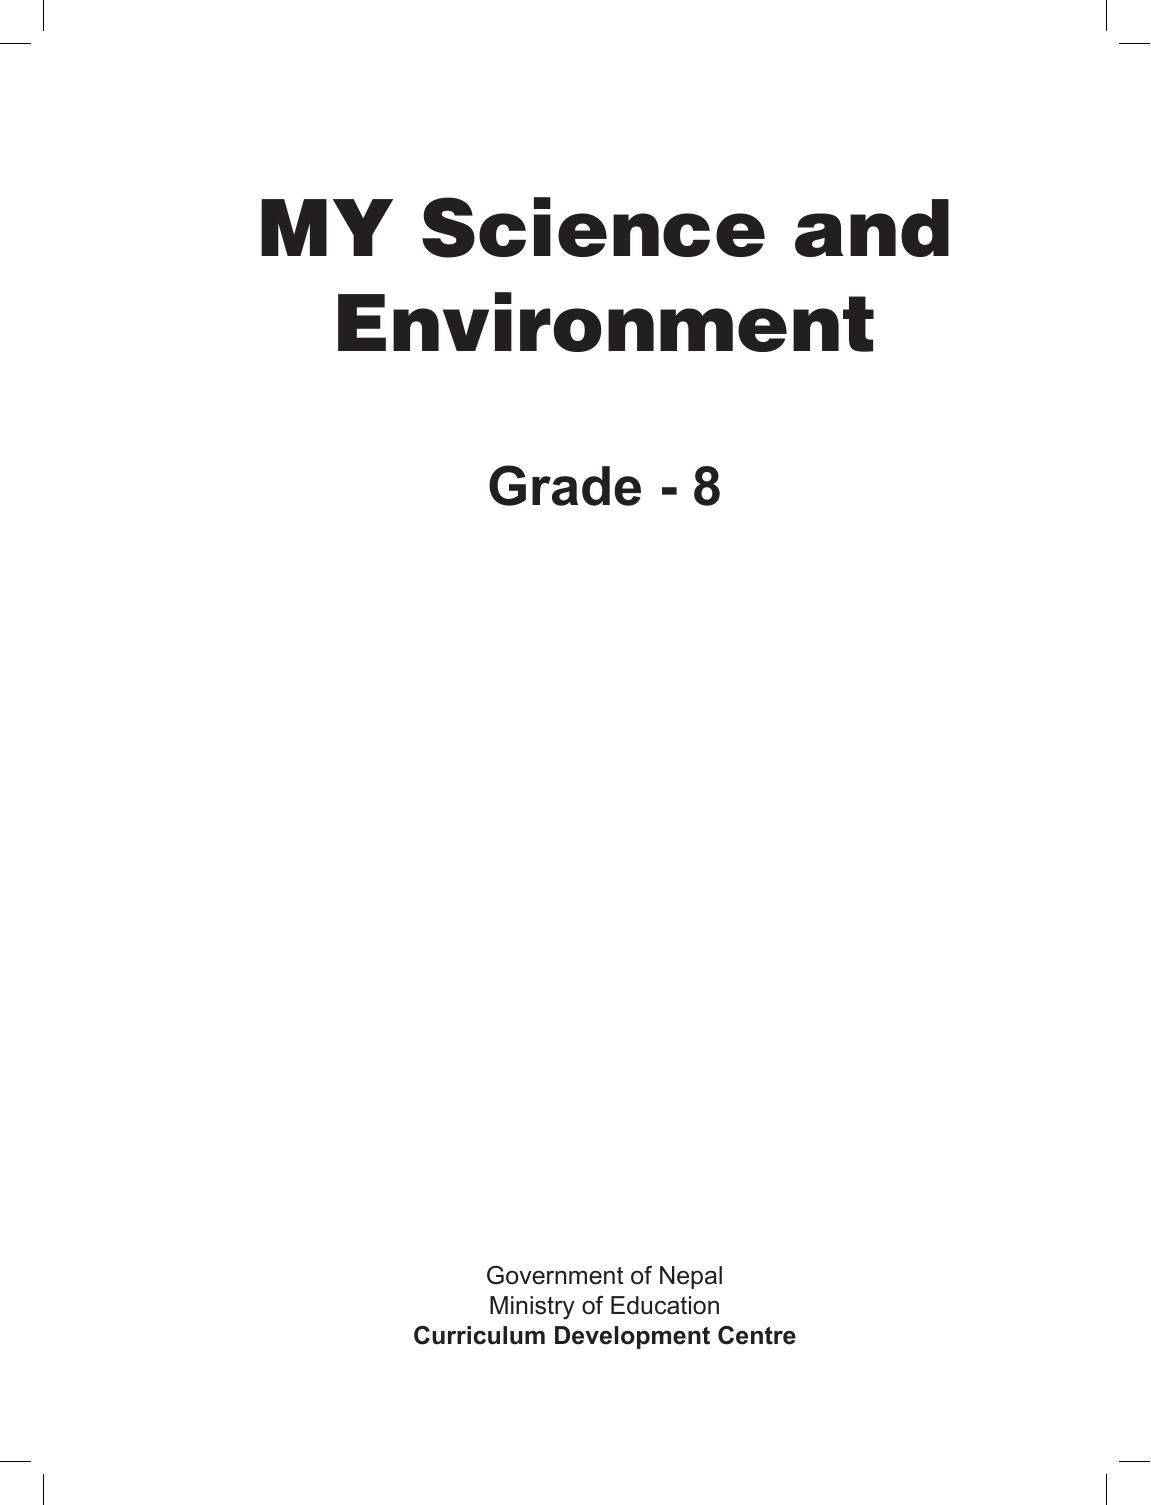 CDC 2018 - My Science and Environment Grade 8